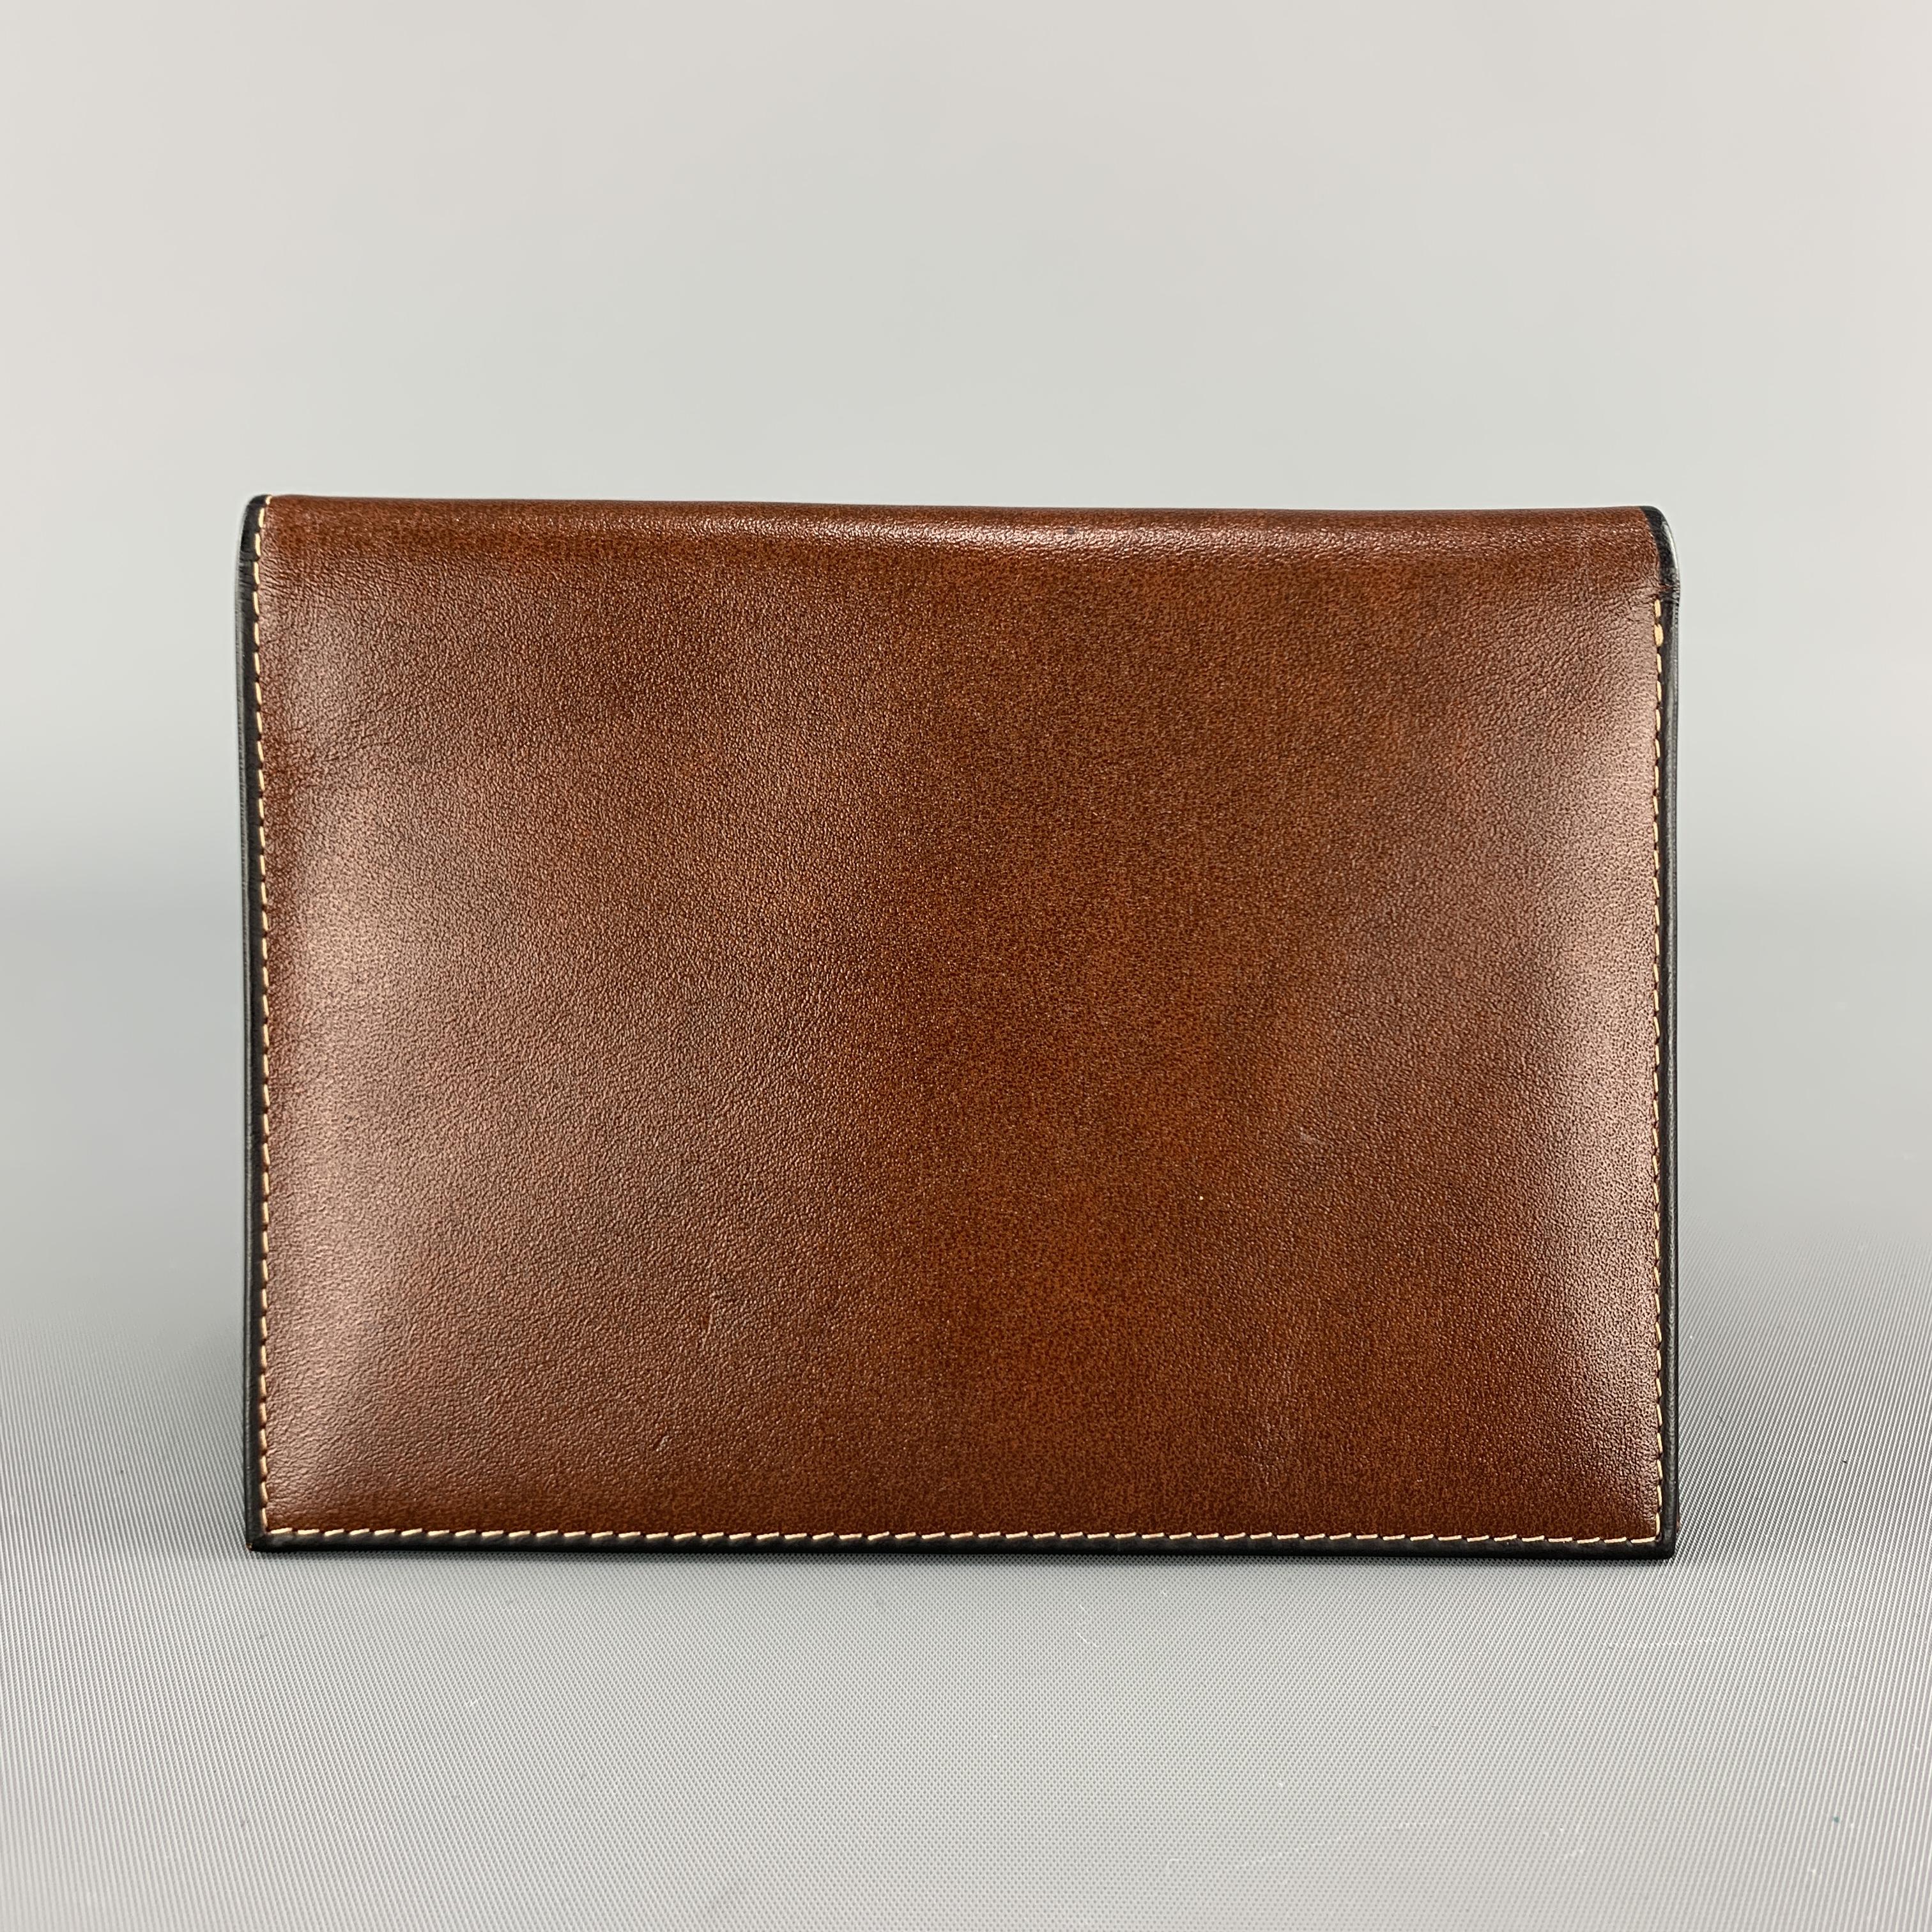 GOLDPFIEL travel wallet comes in tan brown leather with card slots, money compartment, and slot for passport. 

Excellent Pre-Owned Condition.

5.75 x 4.25 in.